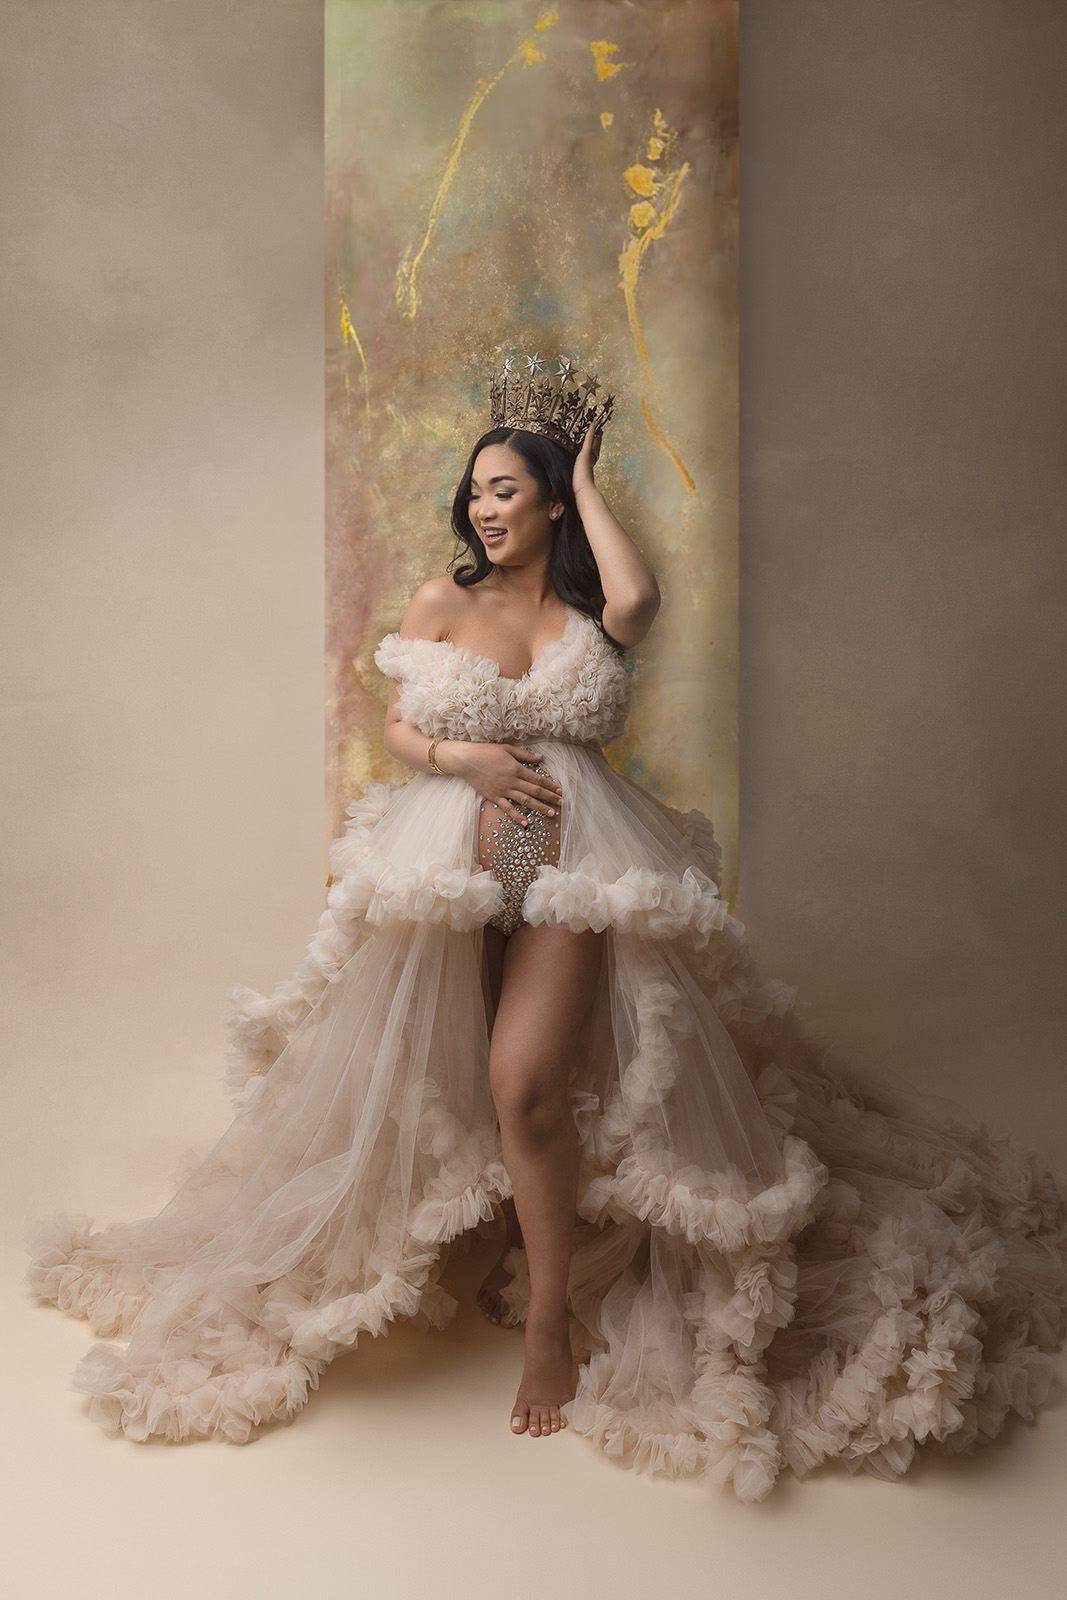 In Studio pregnancy photo shoot with crown and stunning dress